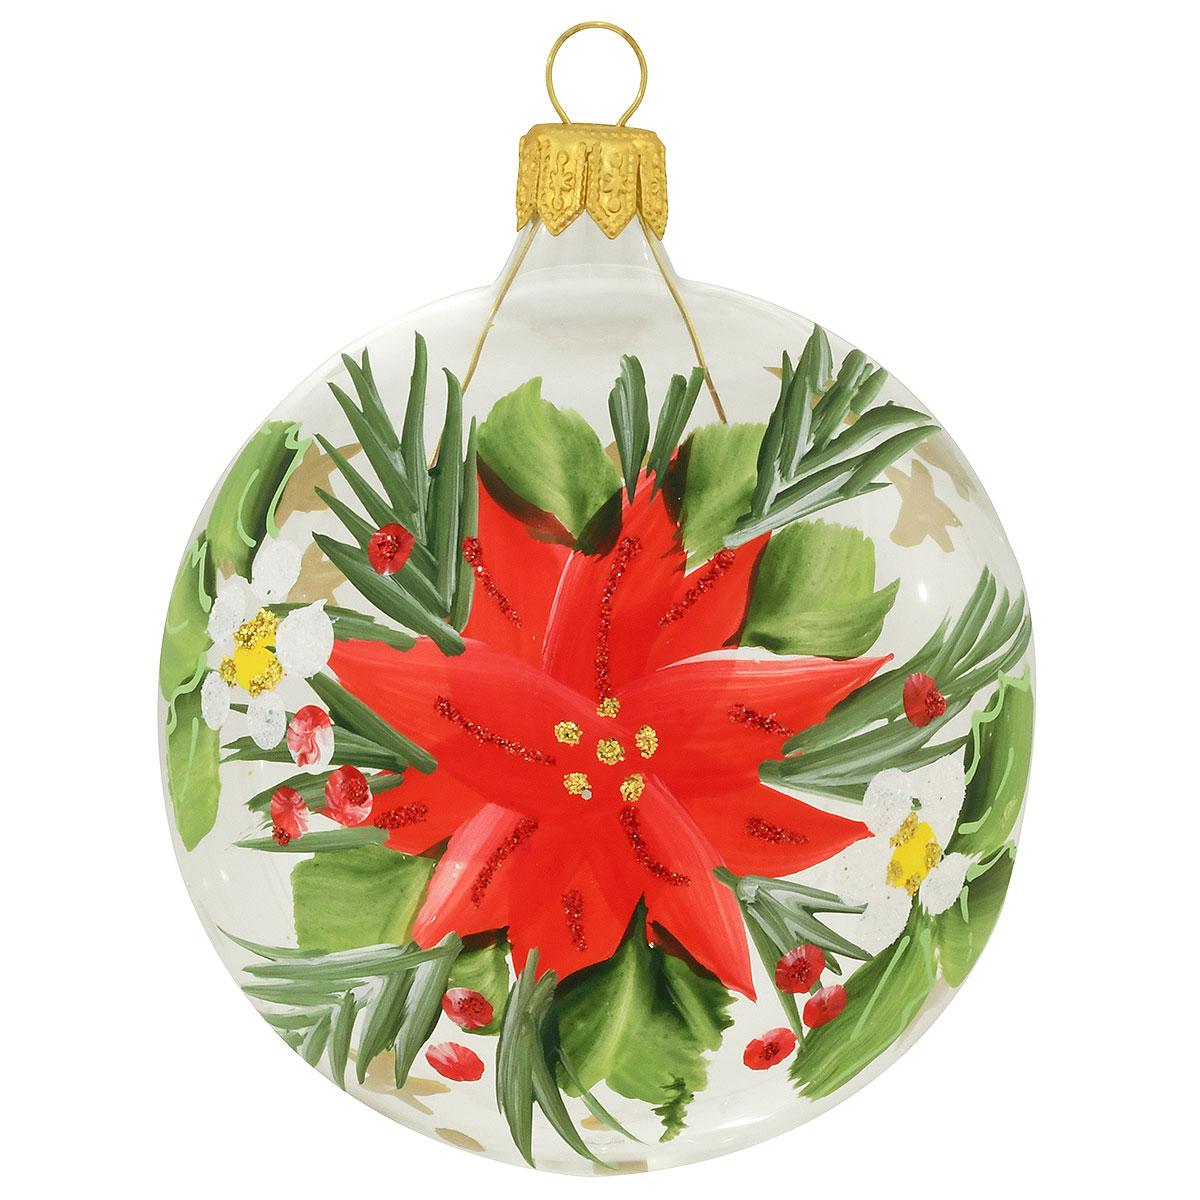 Hand-Painted Poinsettia Glass Ornament